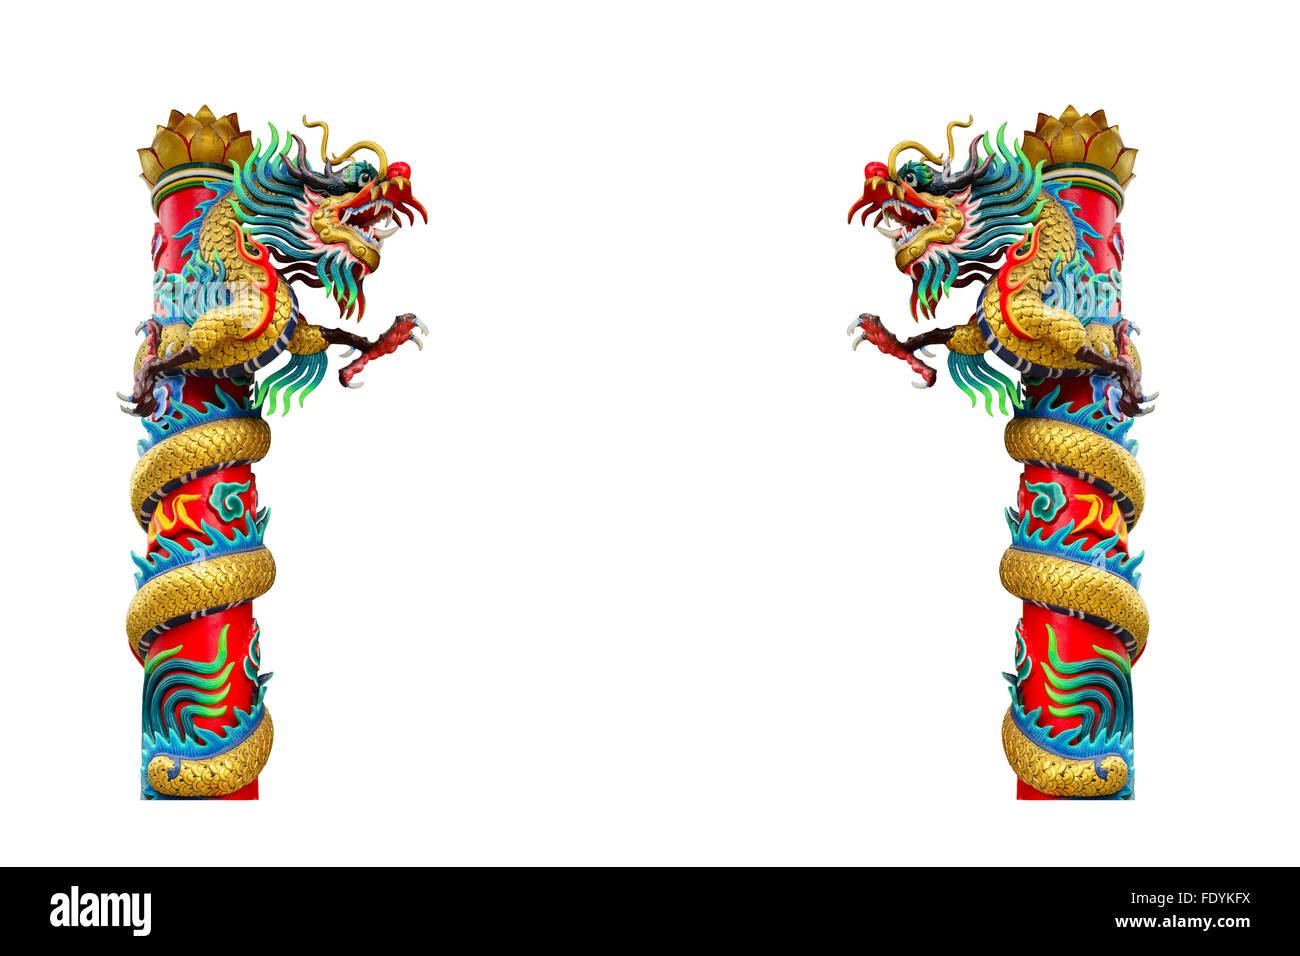 Colorful chinese dragon image on white backgrounds. Stock Photo